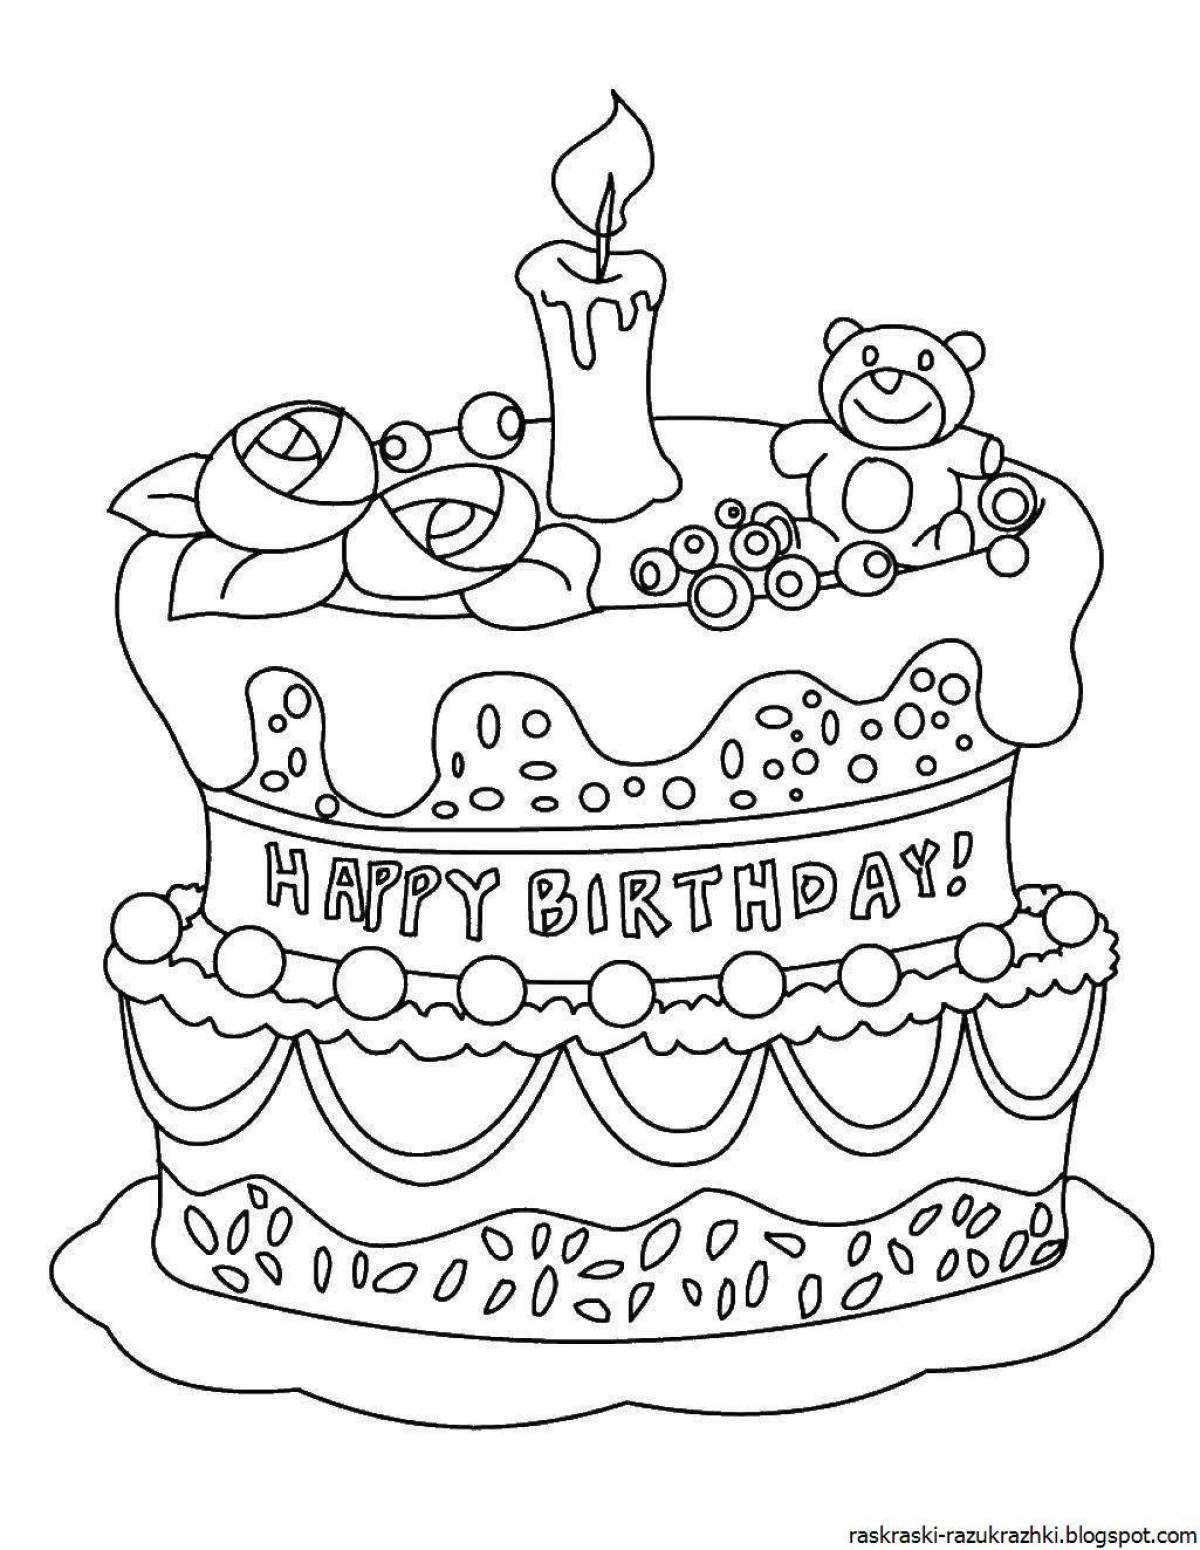 Sweet cakes coloring pages for kids